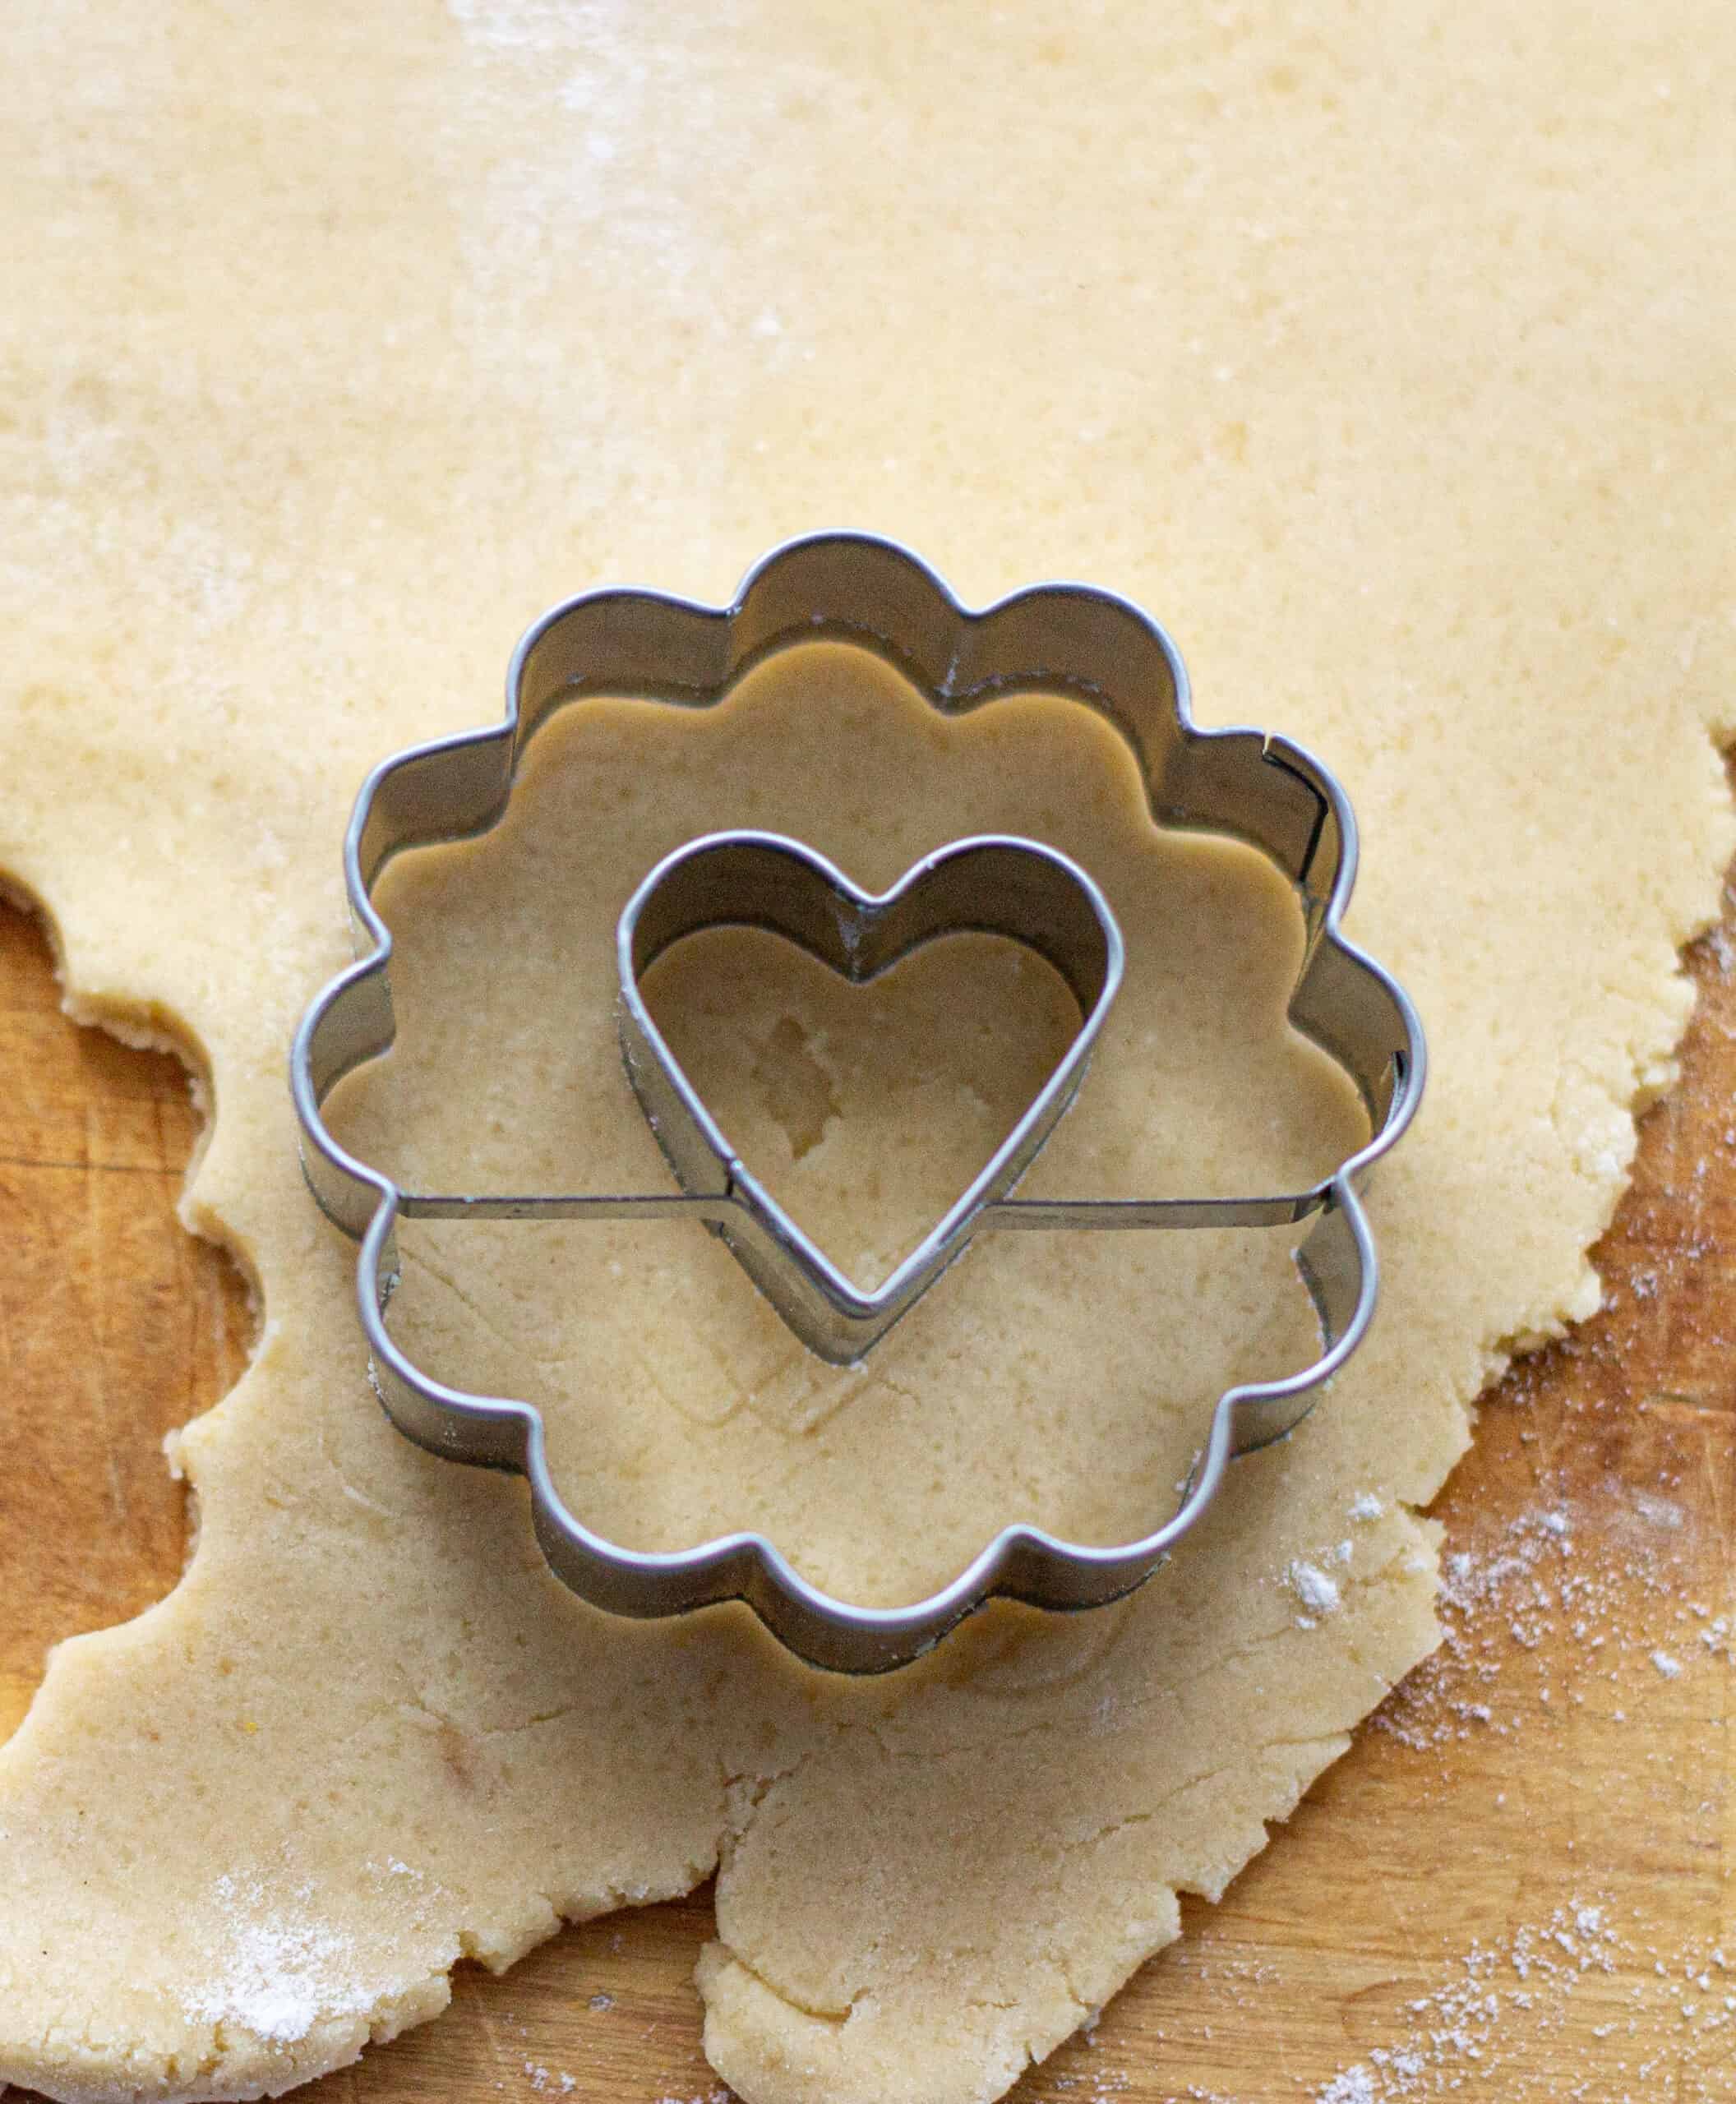 Cut out using a linzer cookie cutter